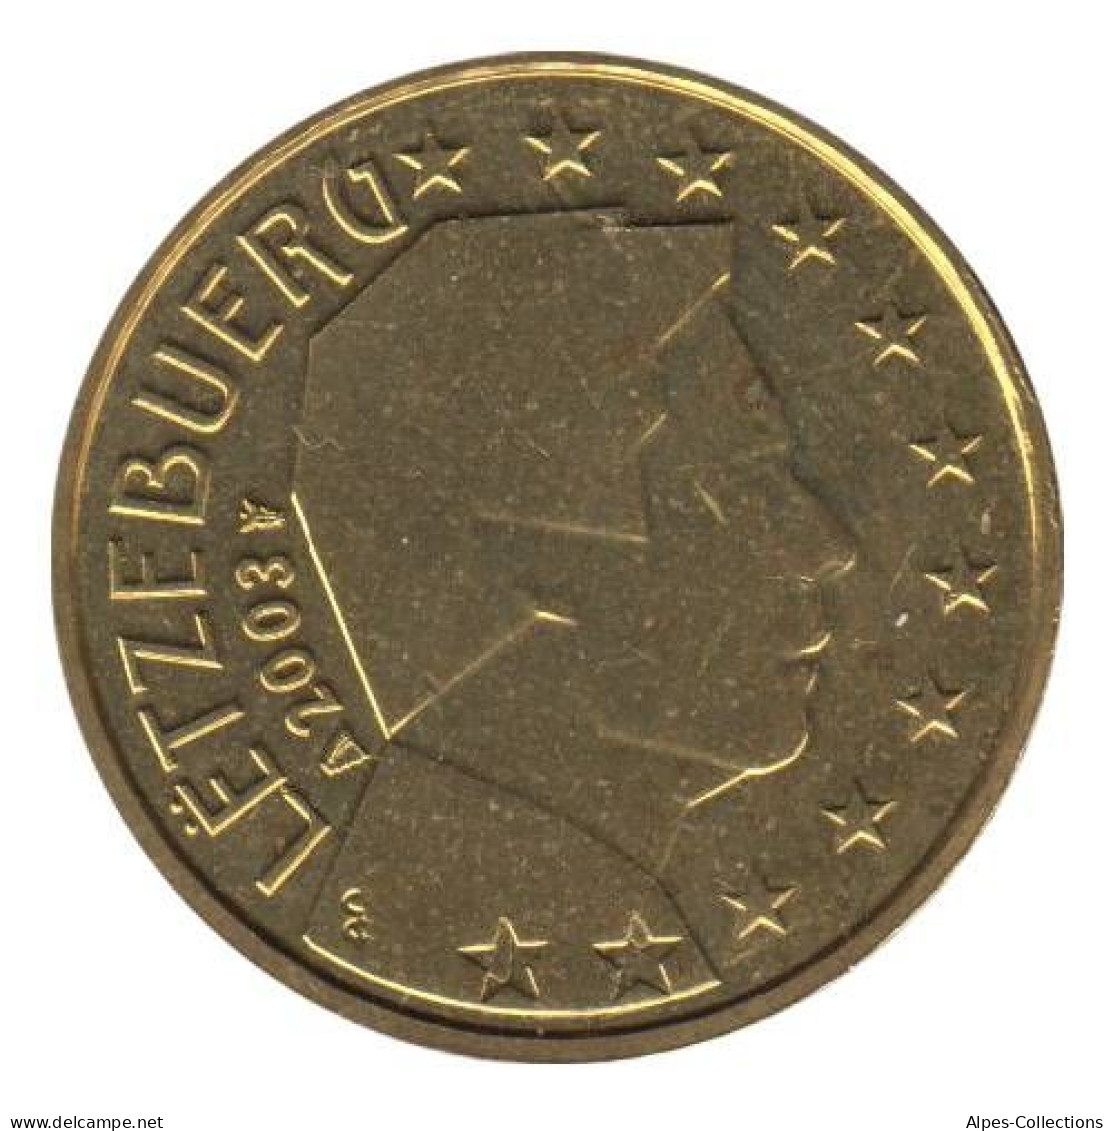 LU01003.1 - LUXEMBOURG - 10 Cents - 2003 - Luxembourg